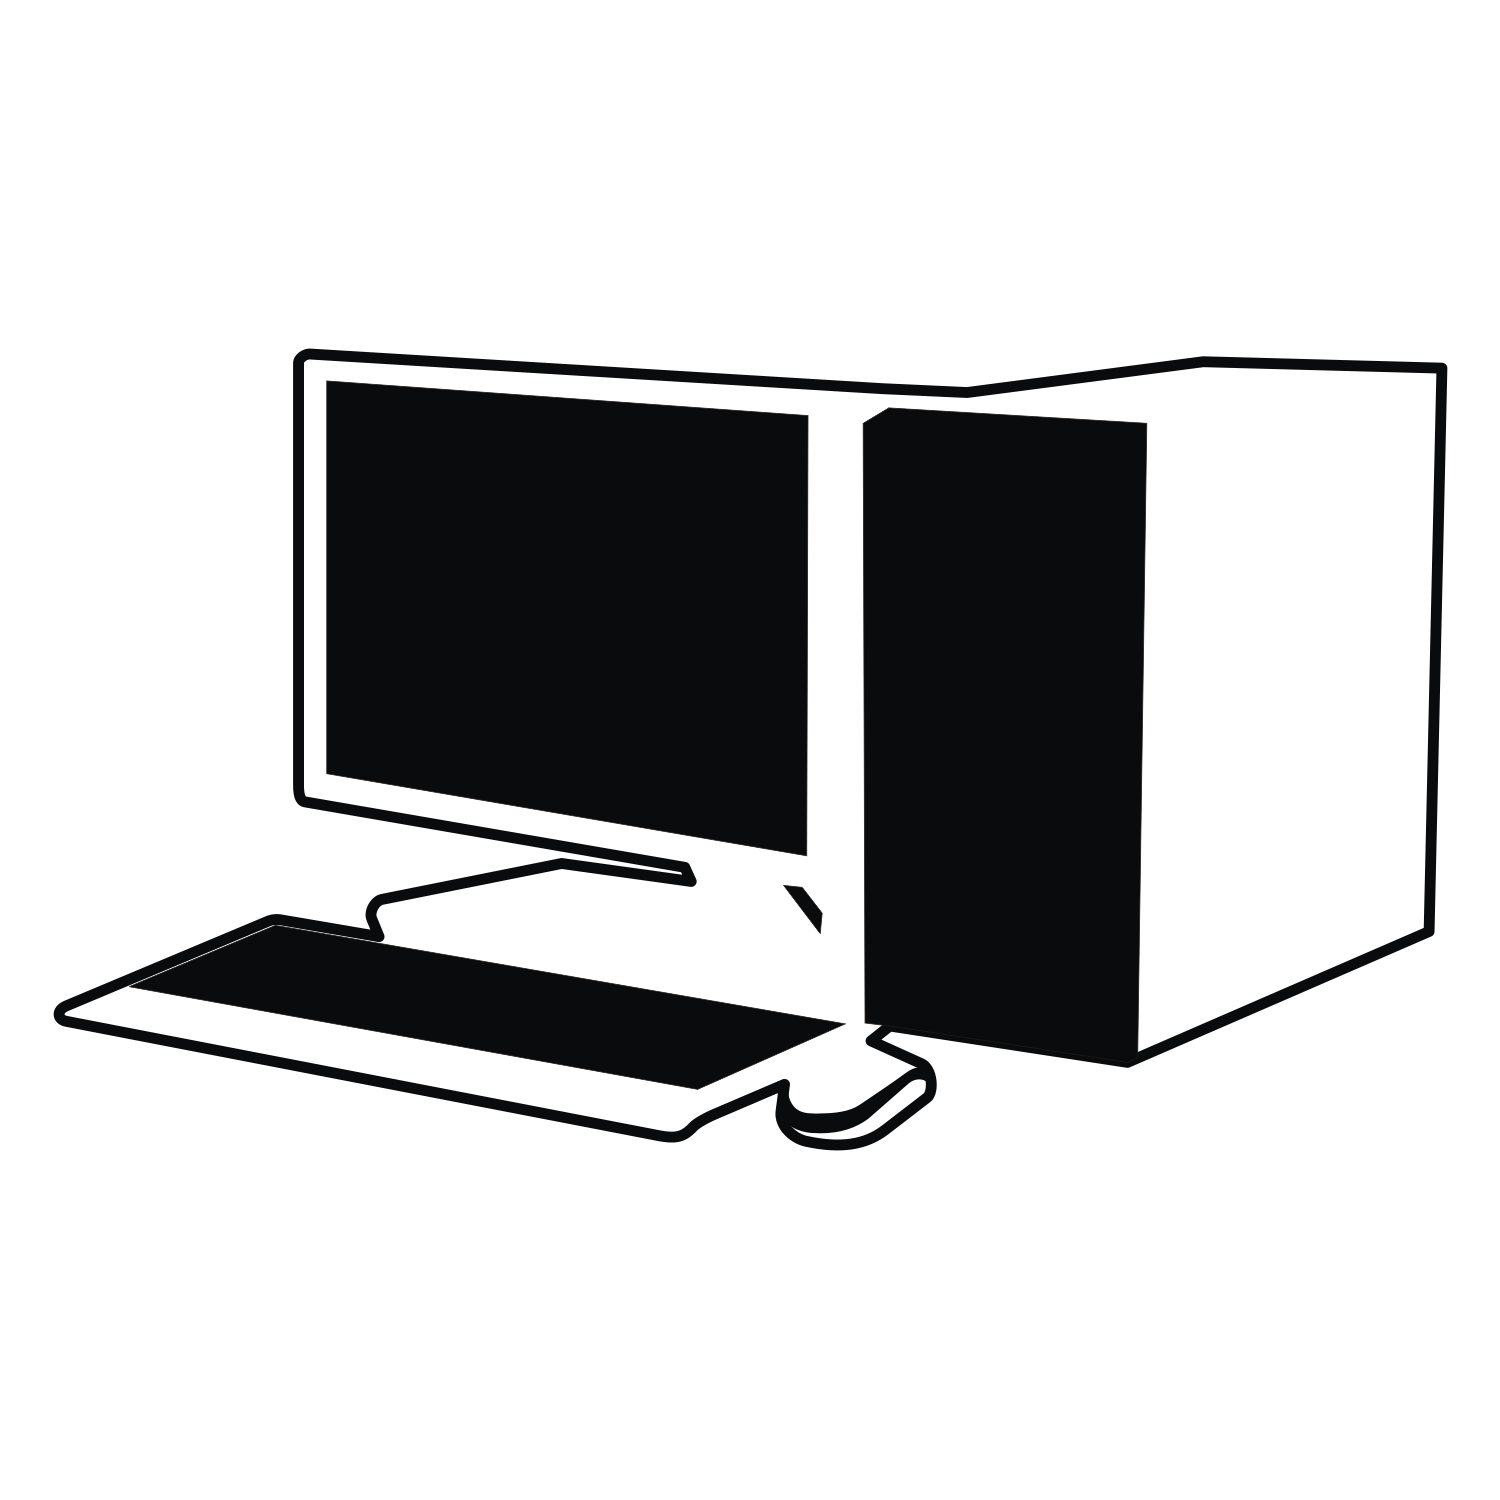 Free Computer Vector Download Free Computer Vector Png Images Free